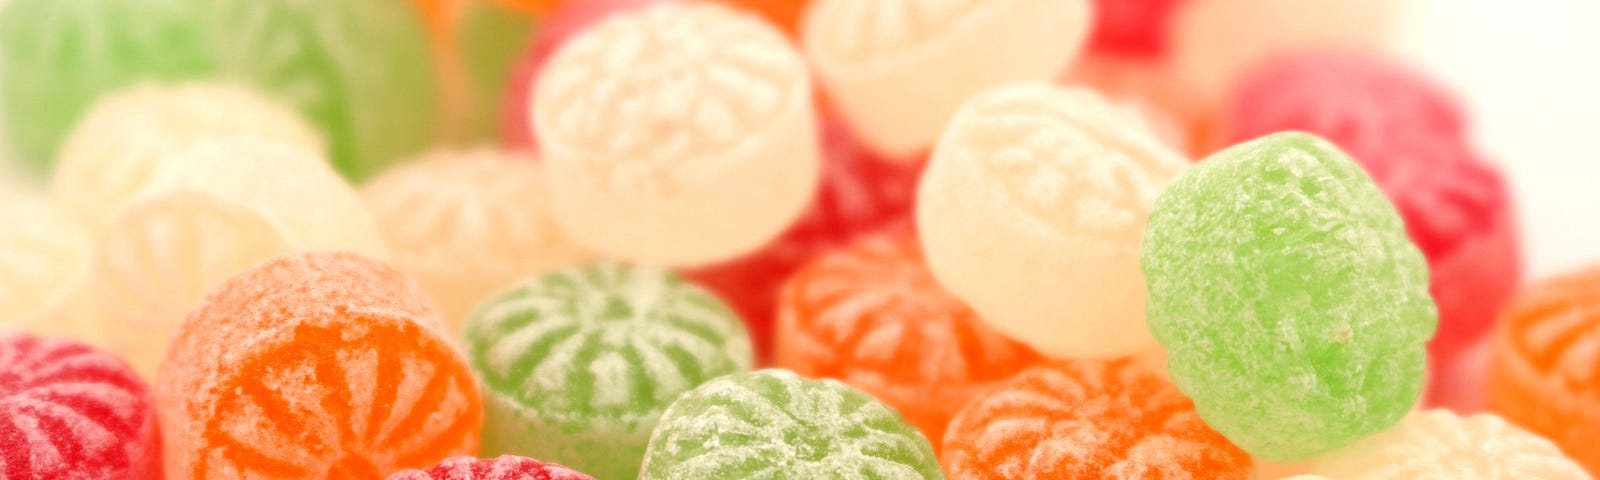 Image of multicoloured sweets or candy.